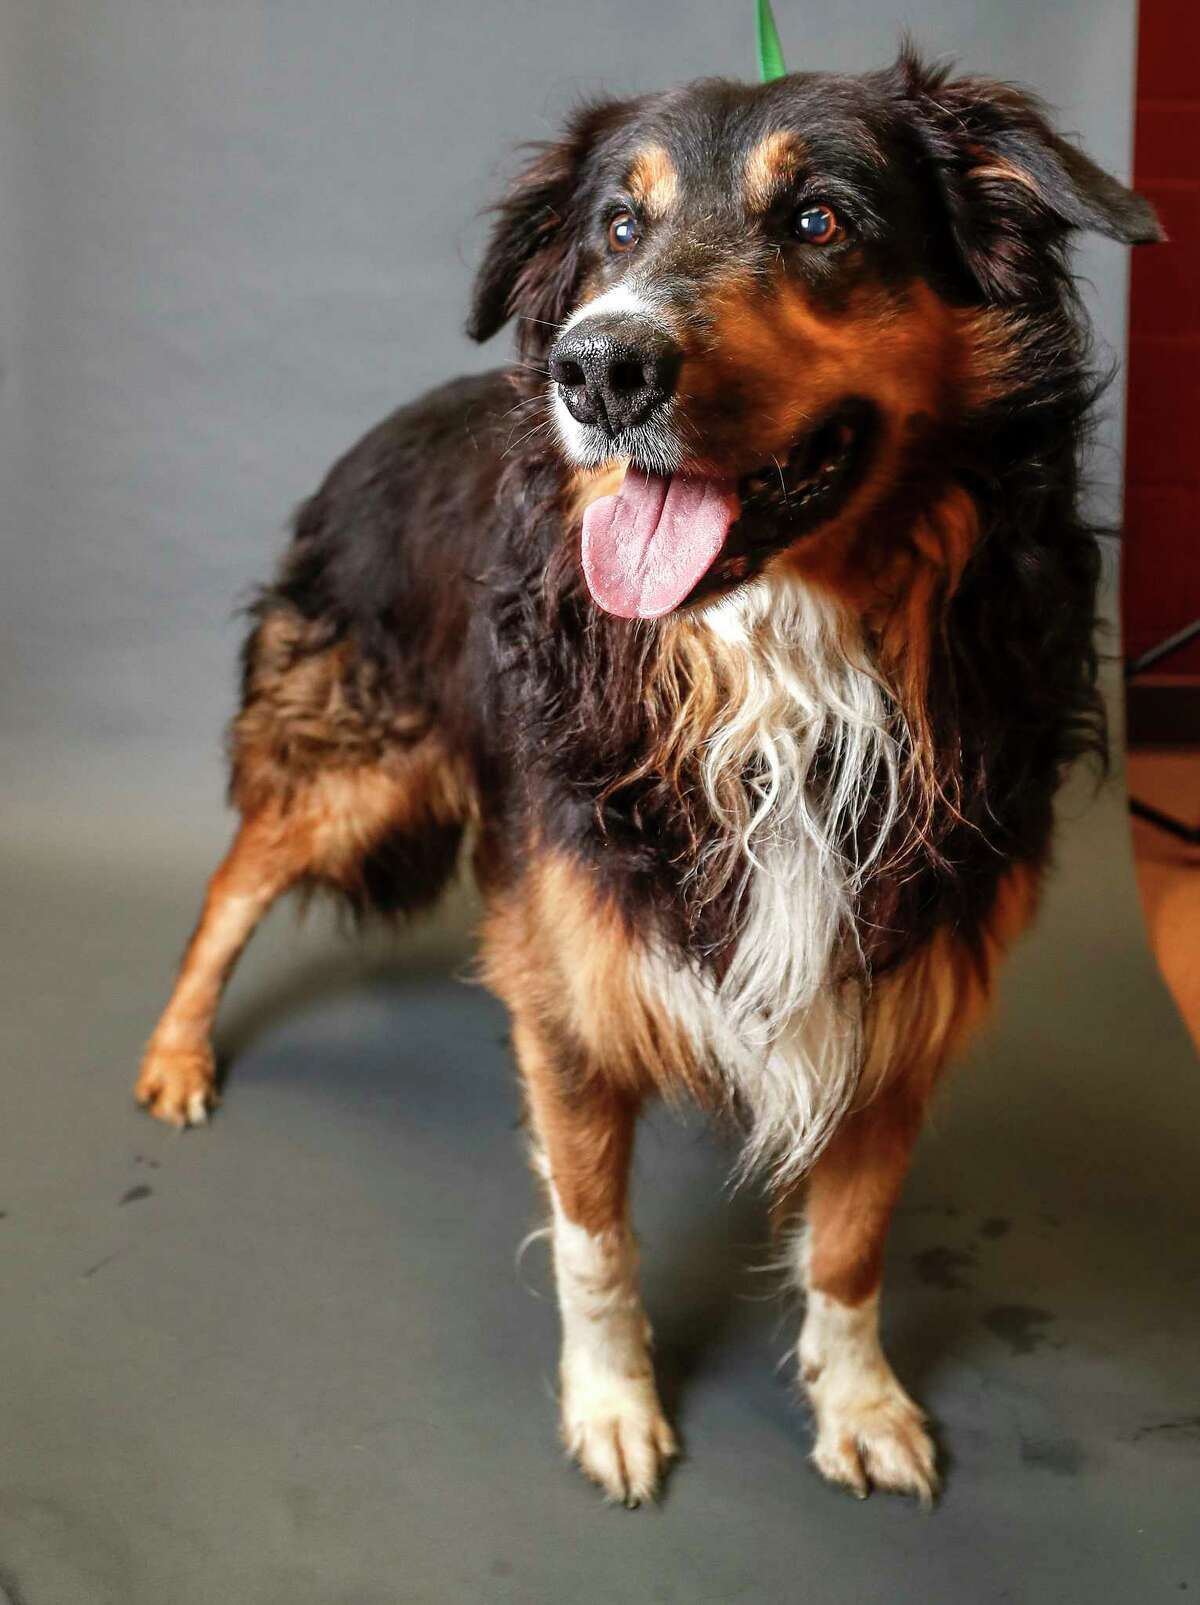 Rascal (ID: 10252) is an adult male, Border Collie mix available for adoption from the Alvin Animal Adoption Center. Photographed, Tuesday, Oct. 1, 2019, in Alvin. Rascal and his owner fell on hard times and they could no longer stay together. Rascal was relinquished to the shelter for adoption. He is super sweet and a happy-go-lucky boy.